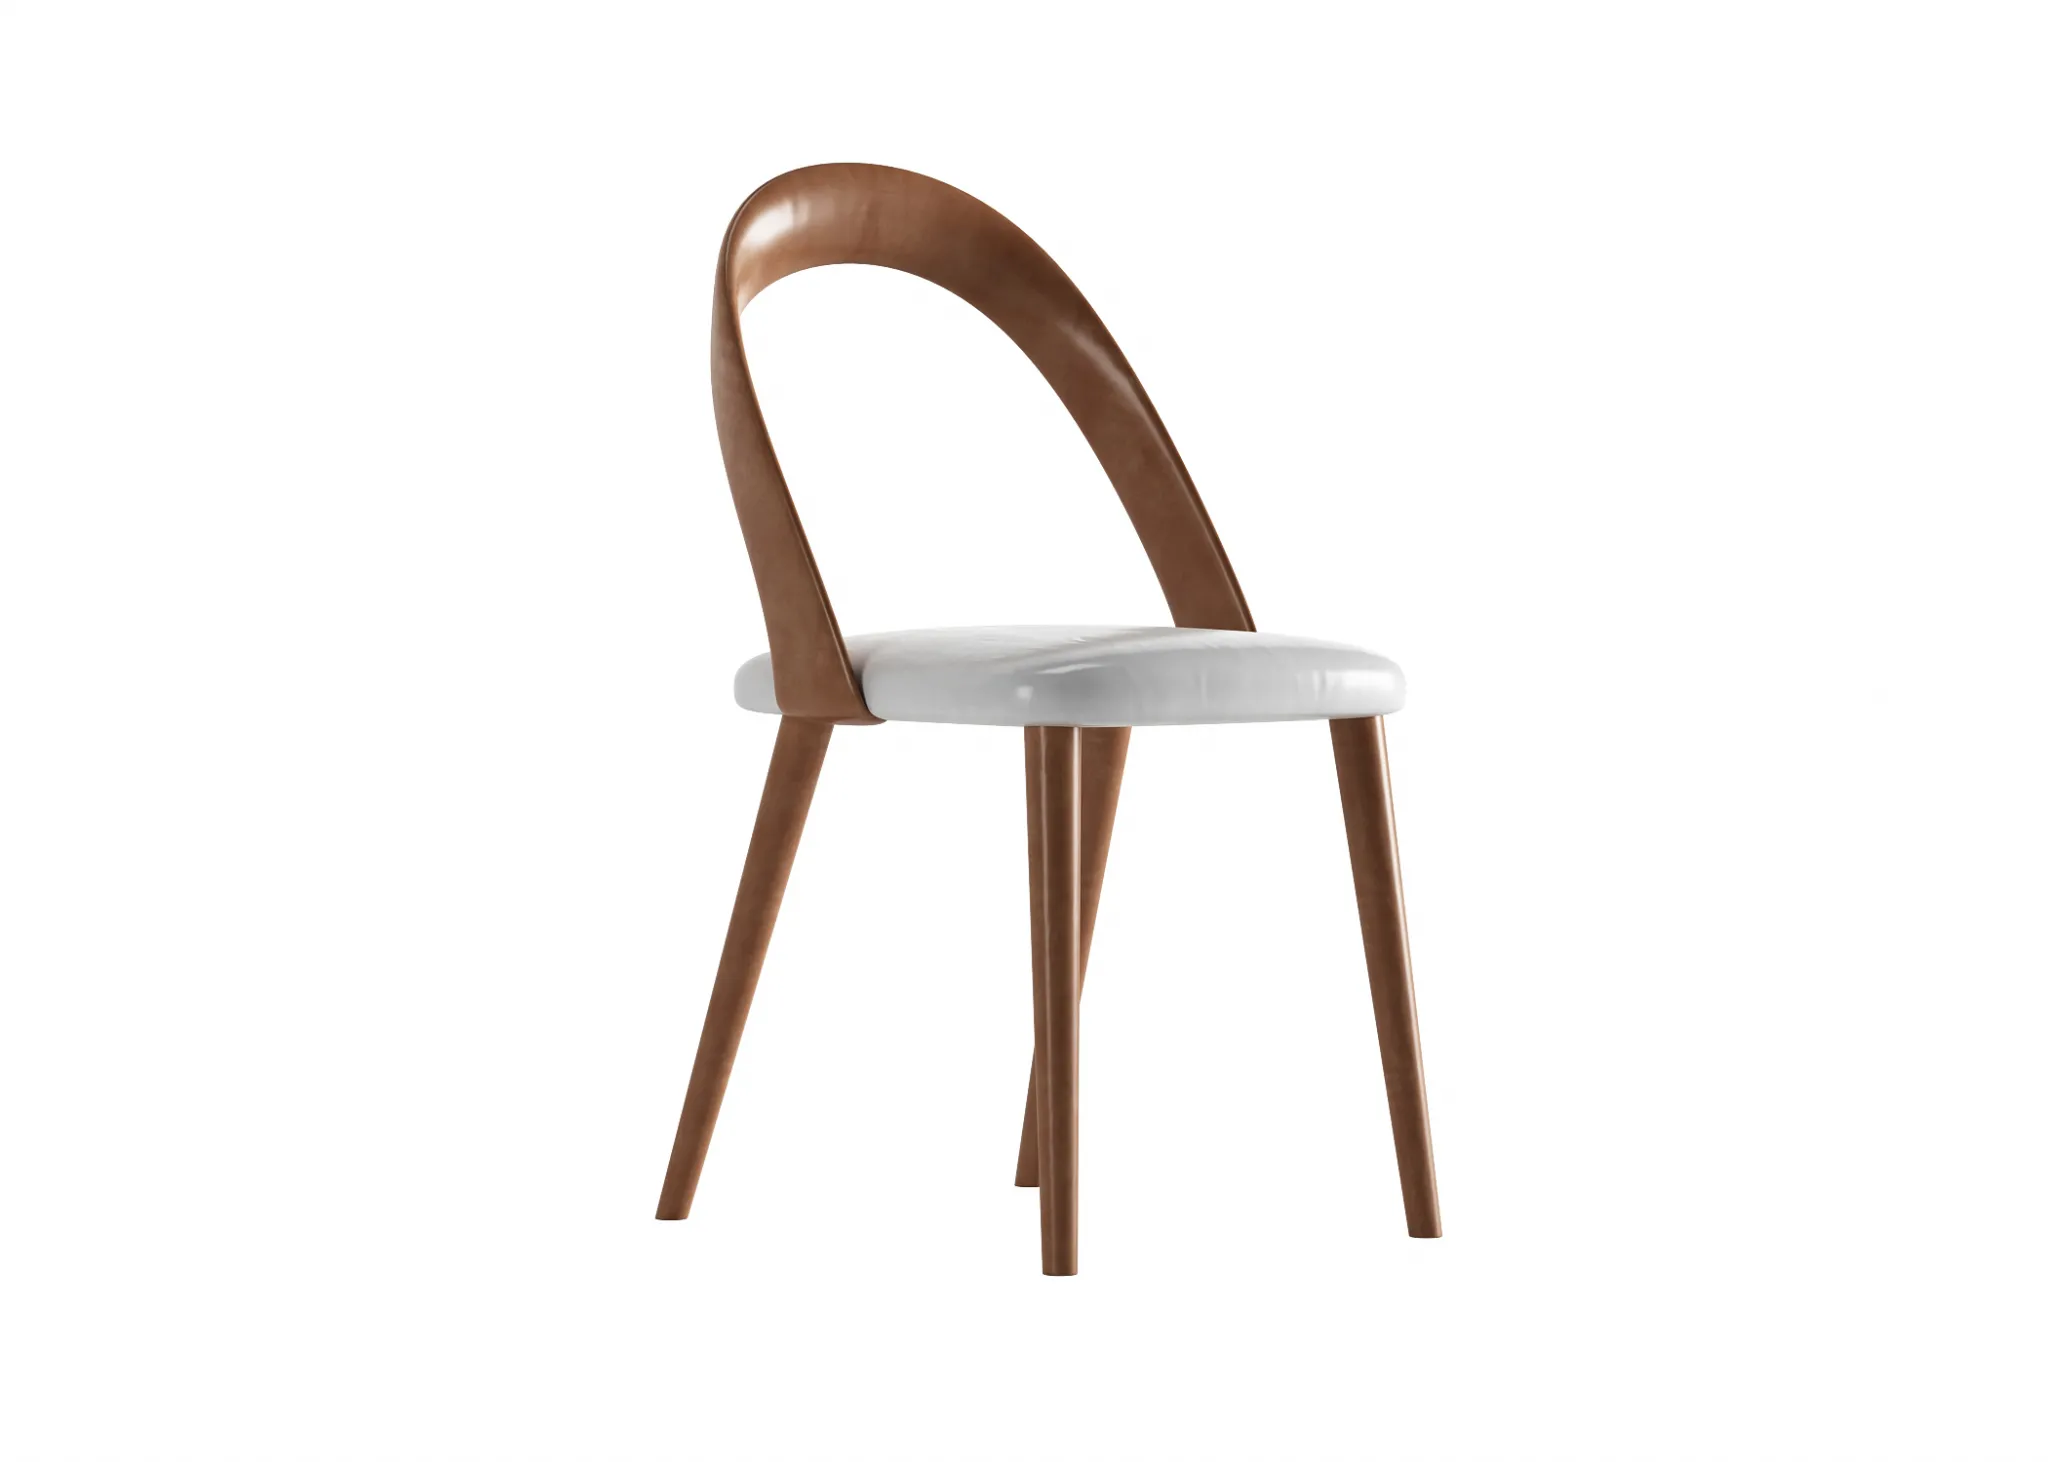 FURNITURE 3D MODELS – CHAIRS – 0507